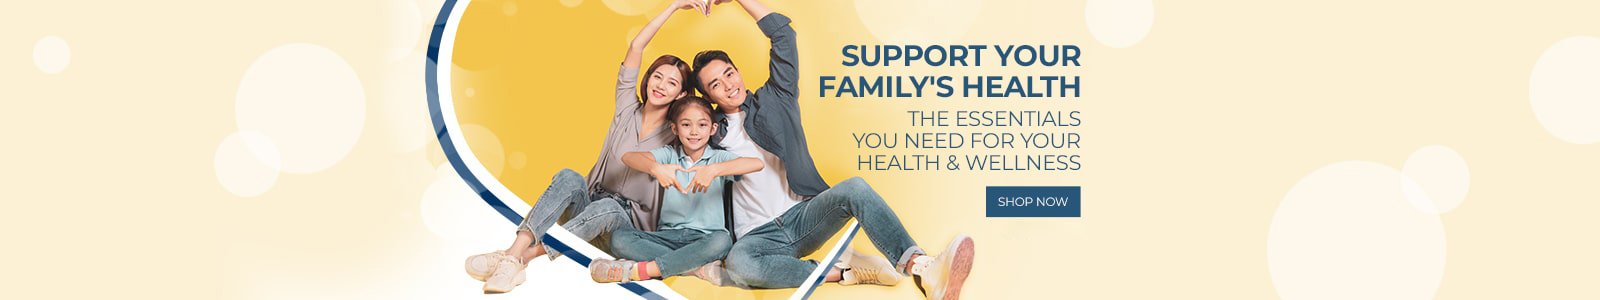 Support Your Family's Health. The essentials you need for your health & wellness. Shop Now